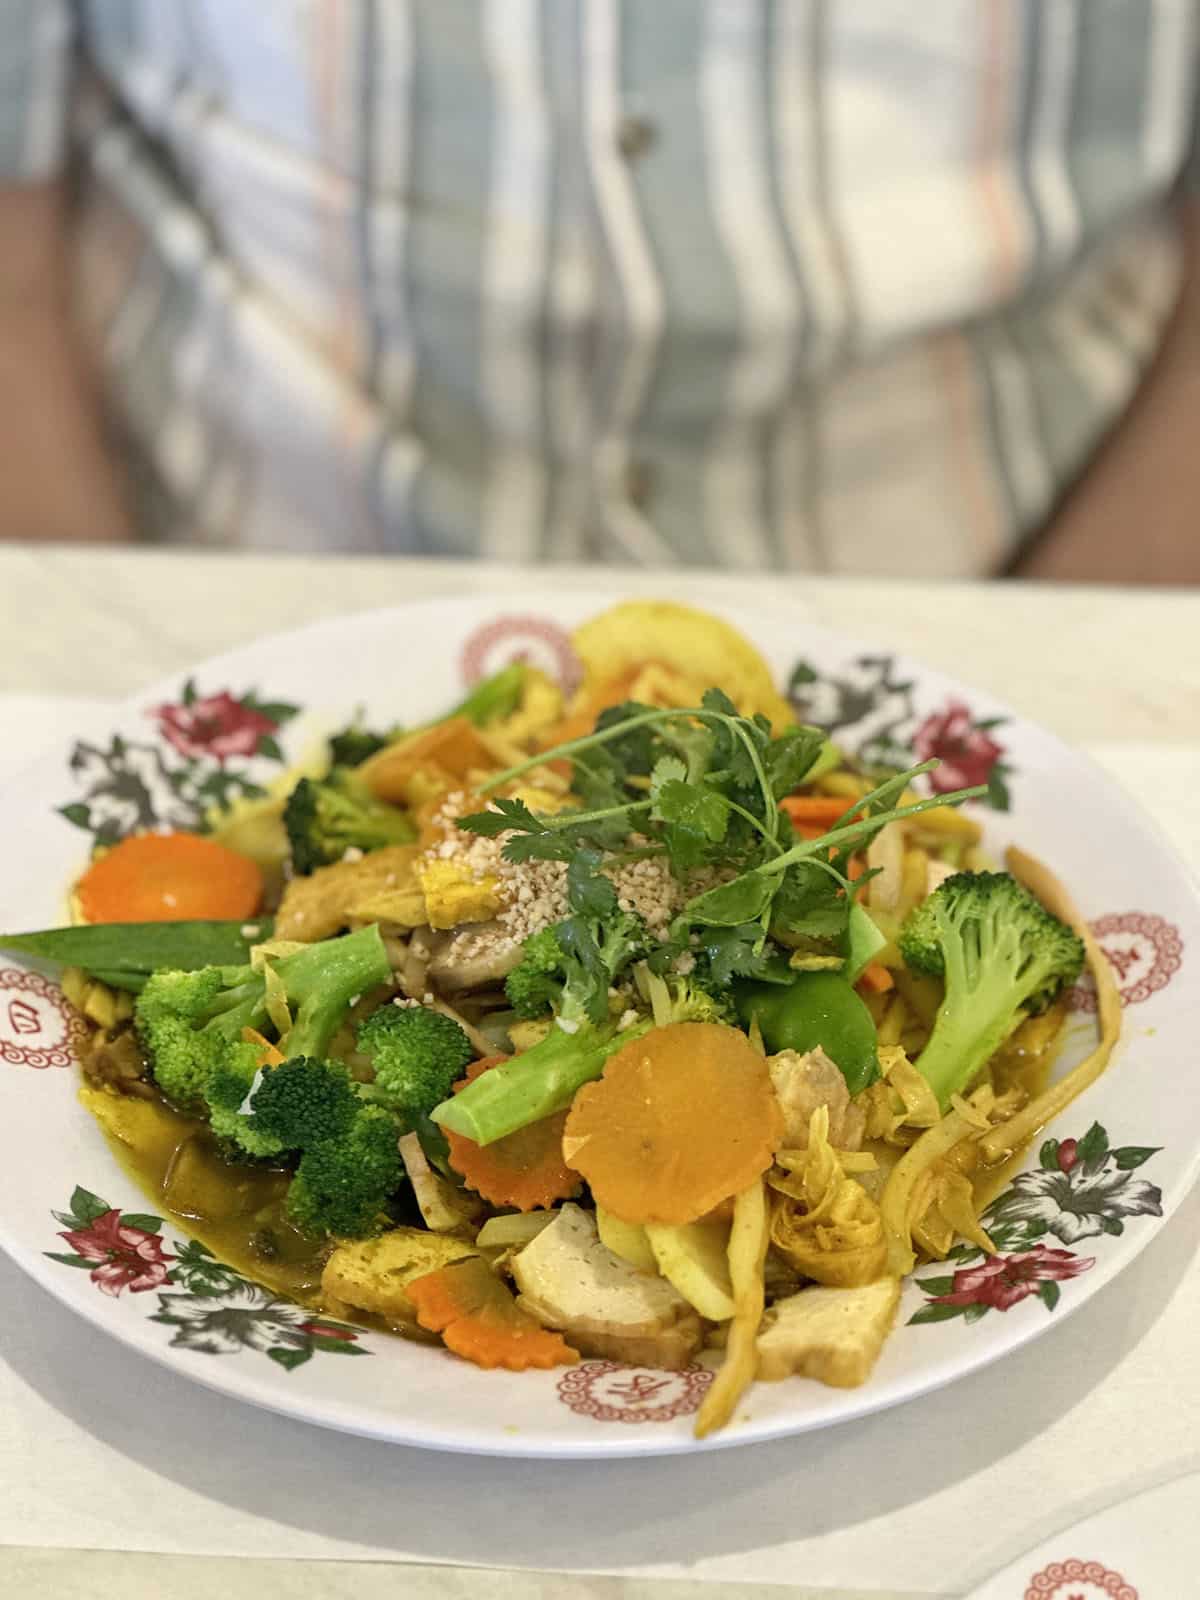 Tofu stir-fried with curry and vegetables on floral plate.